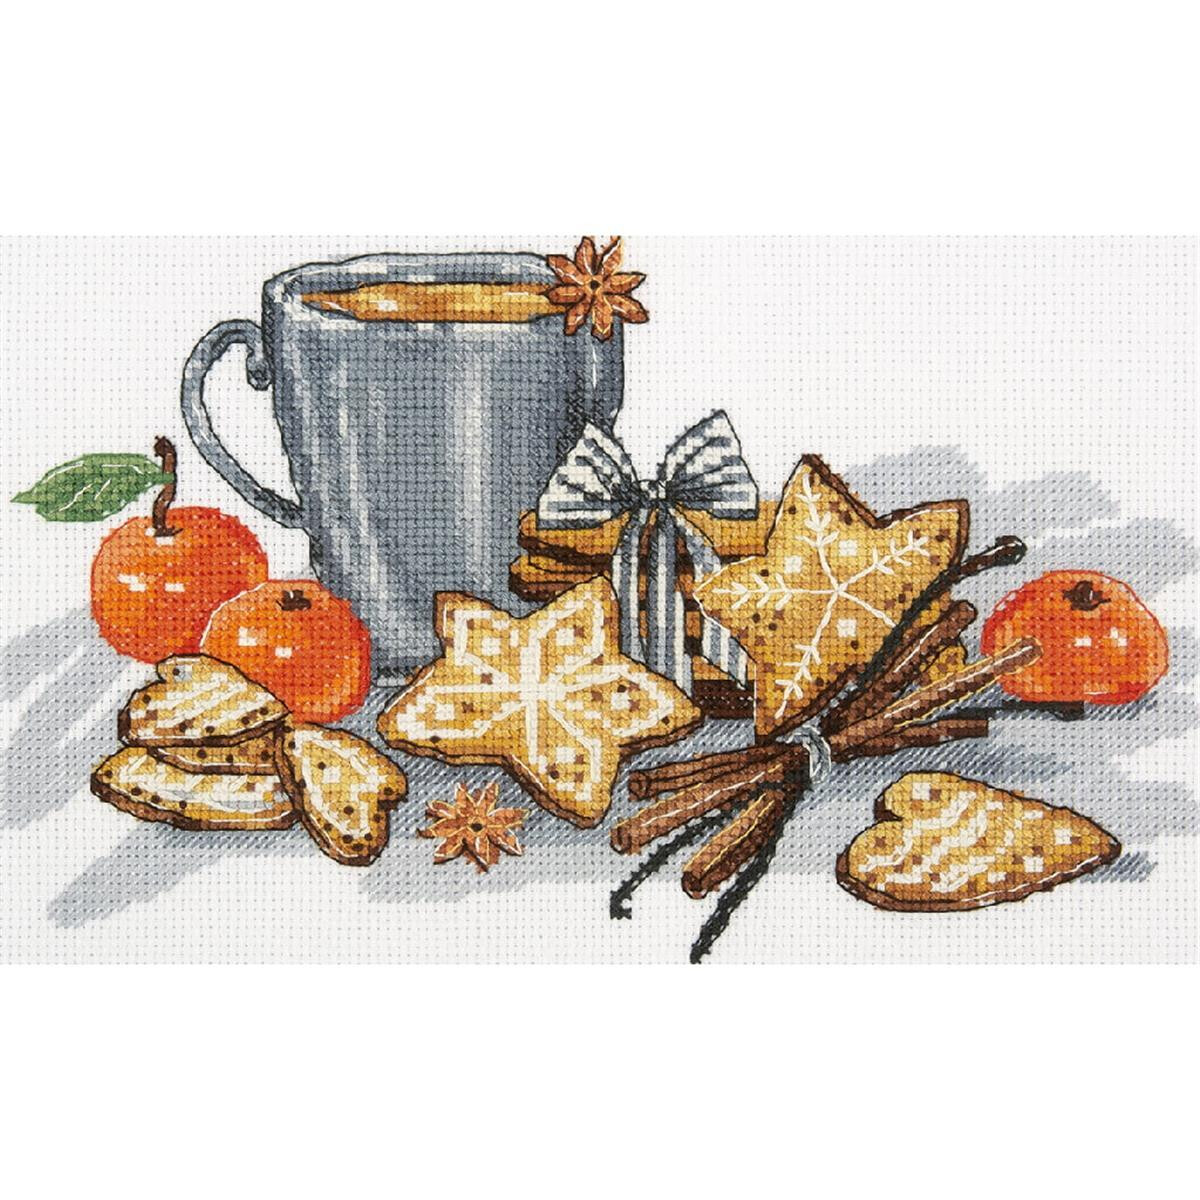 Panna counted cross stitch kit "Gingerbread...